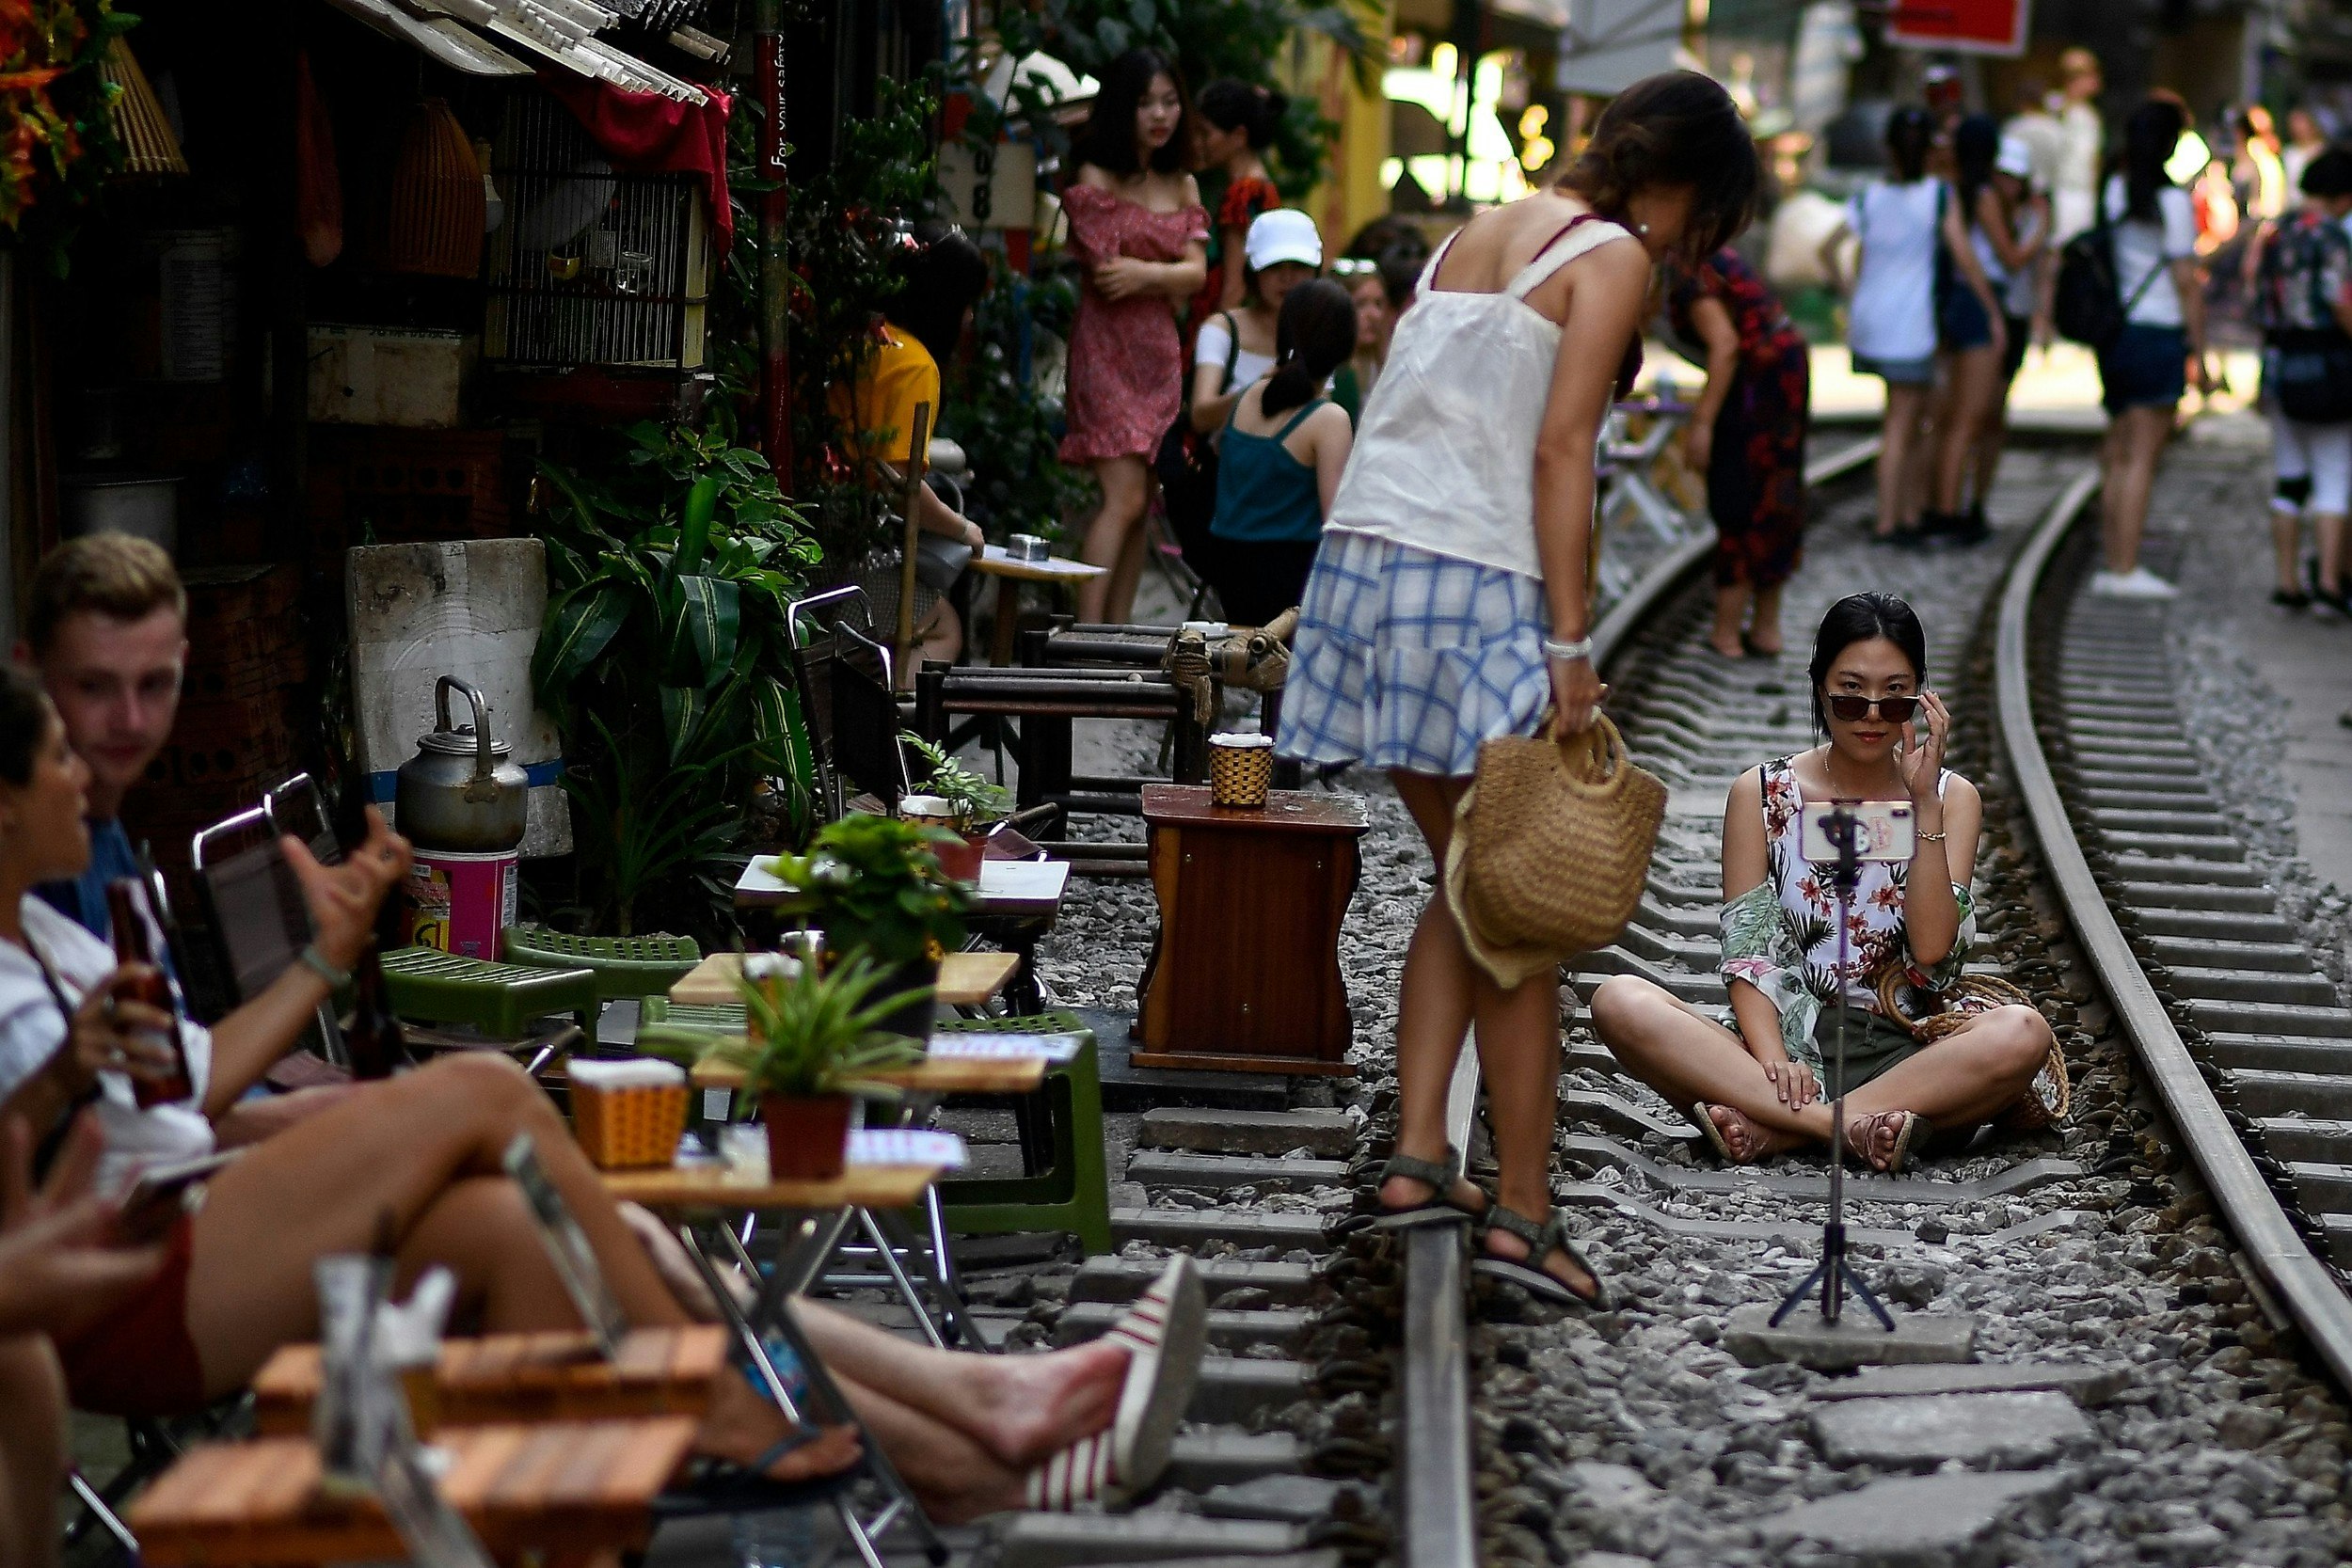 Women posing for a selfie on the railway track in Hanoi's Train Street and other people lining the street